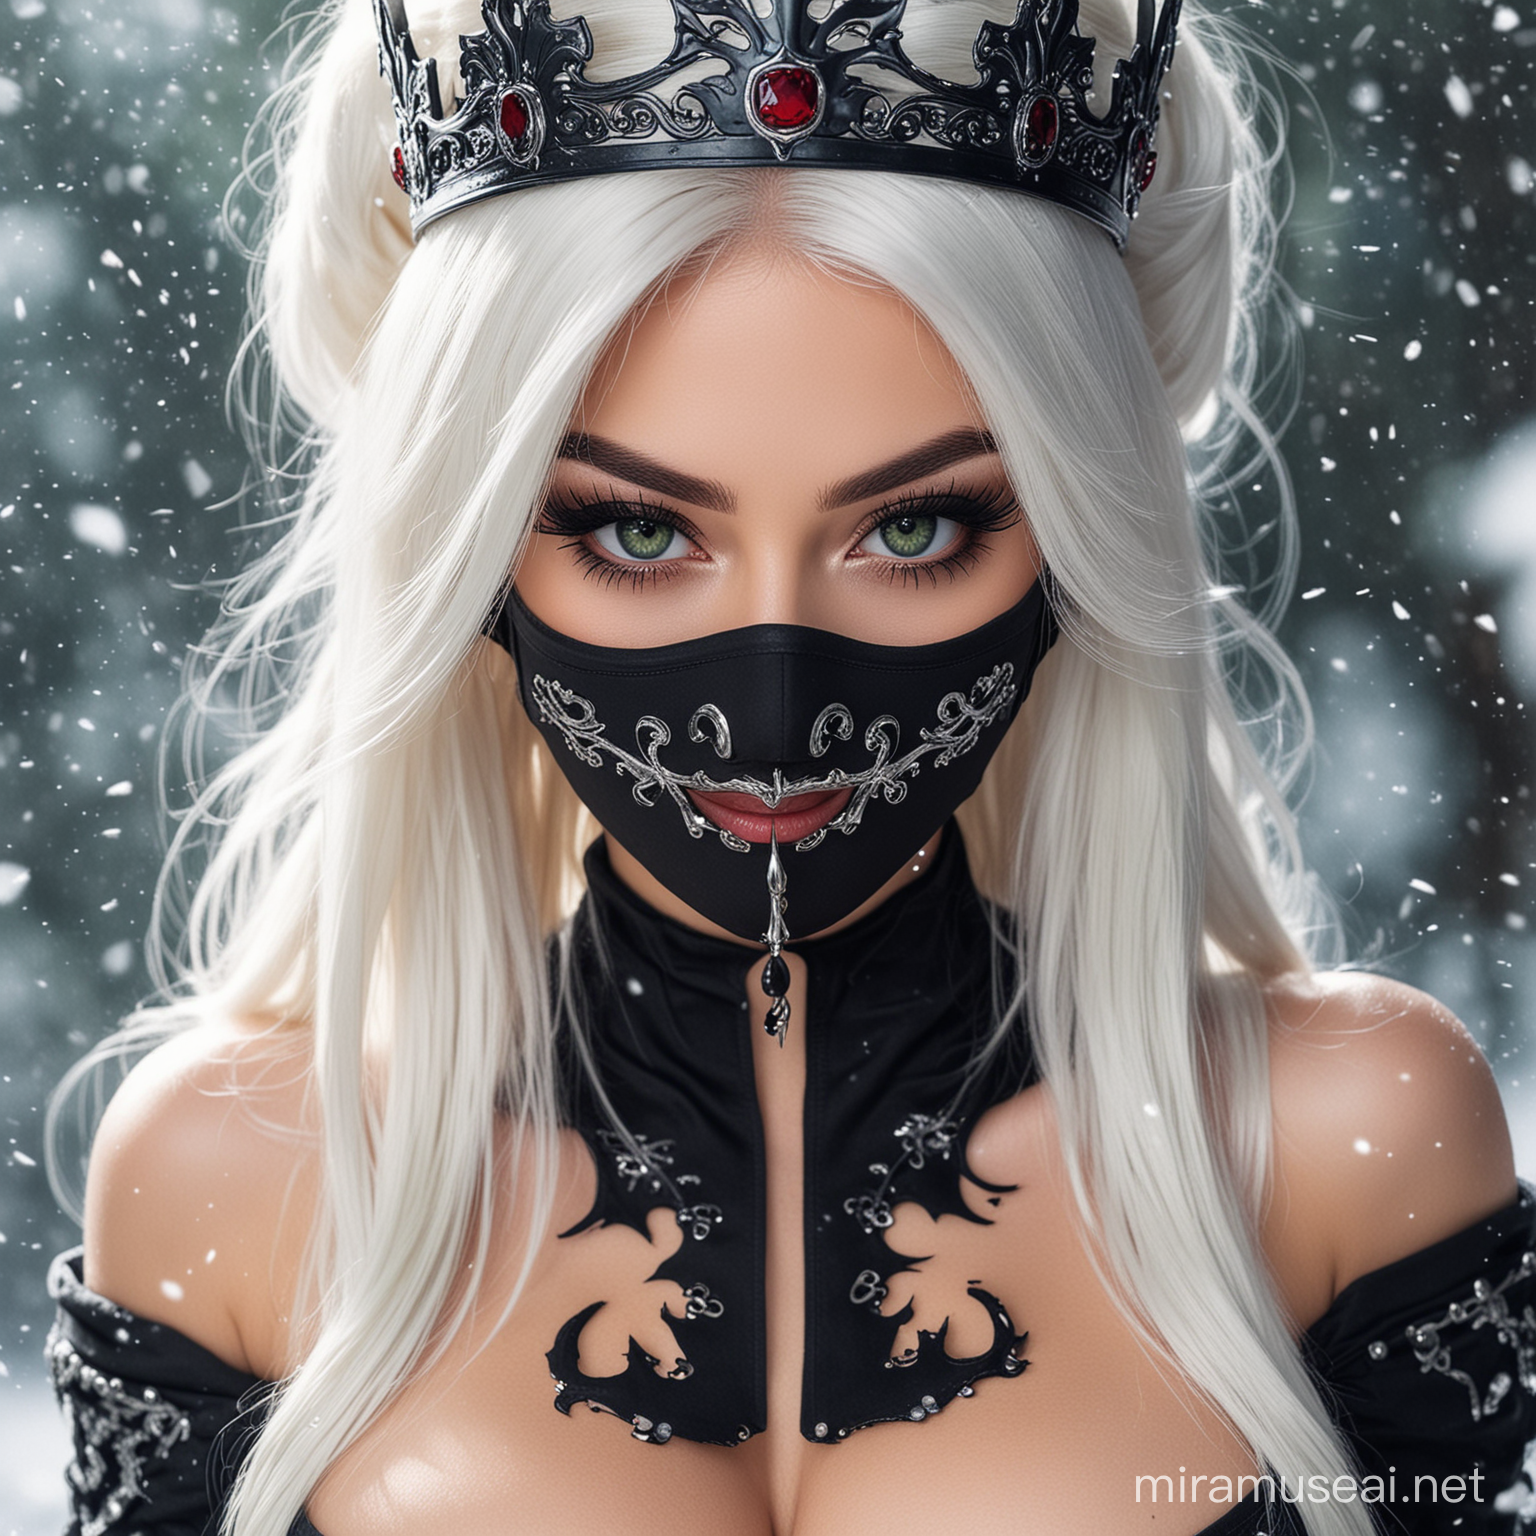 A stunning ninja hot princess big boobs with flowing snow white  hair and piercing green eyes and wearing black mask with crown, seductive charm.